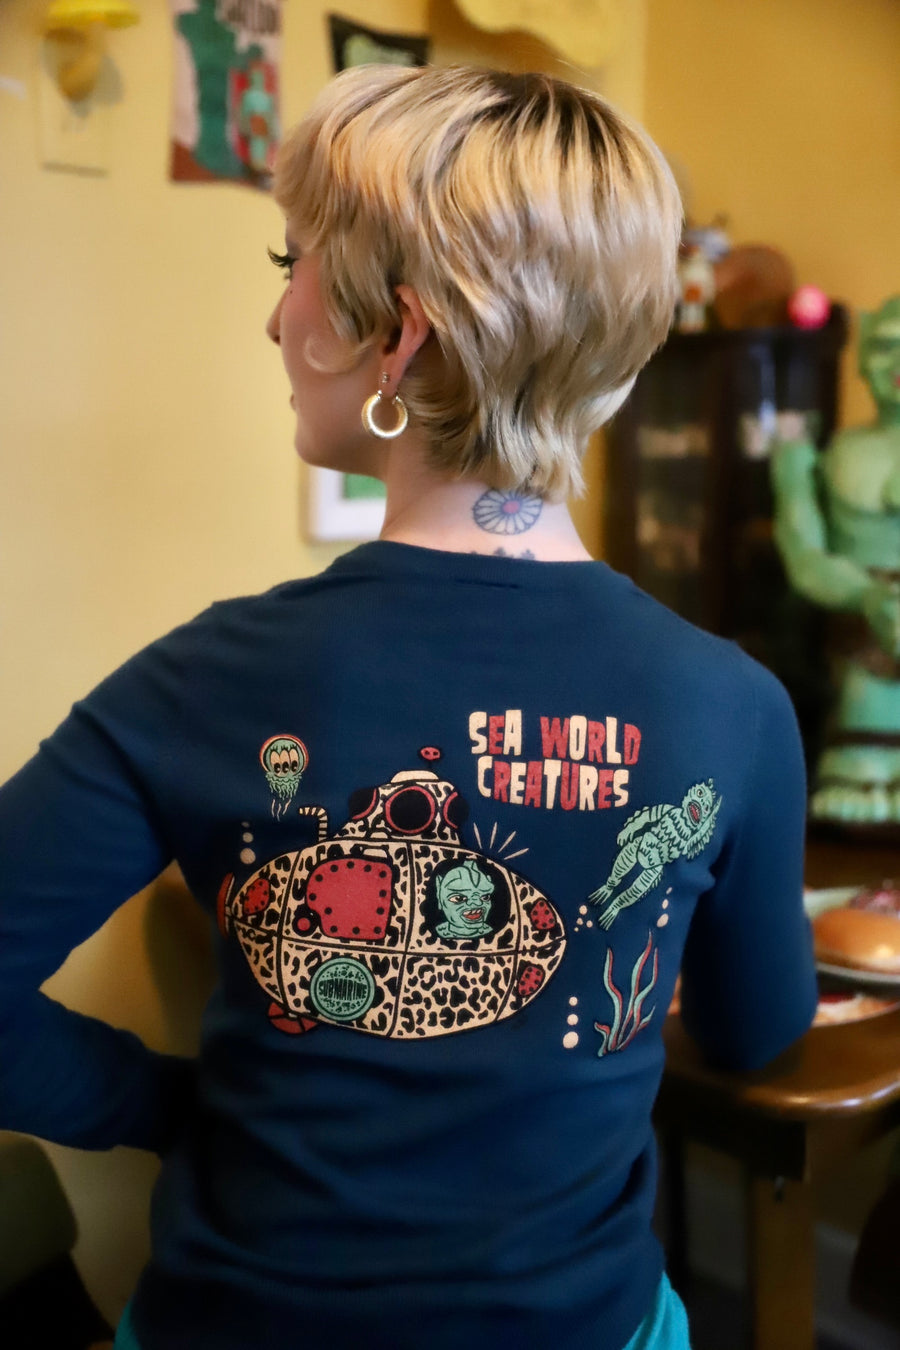 JELLYFISH EMBROIDERY FITTED SWEATER  *PEACOCK